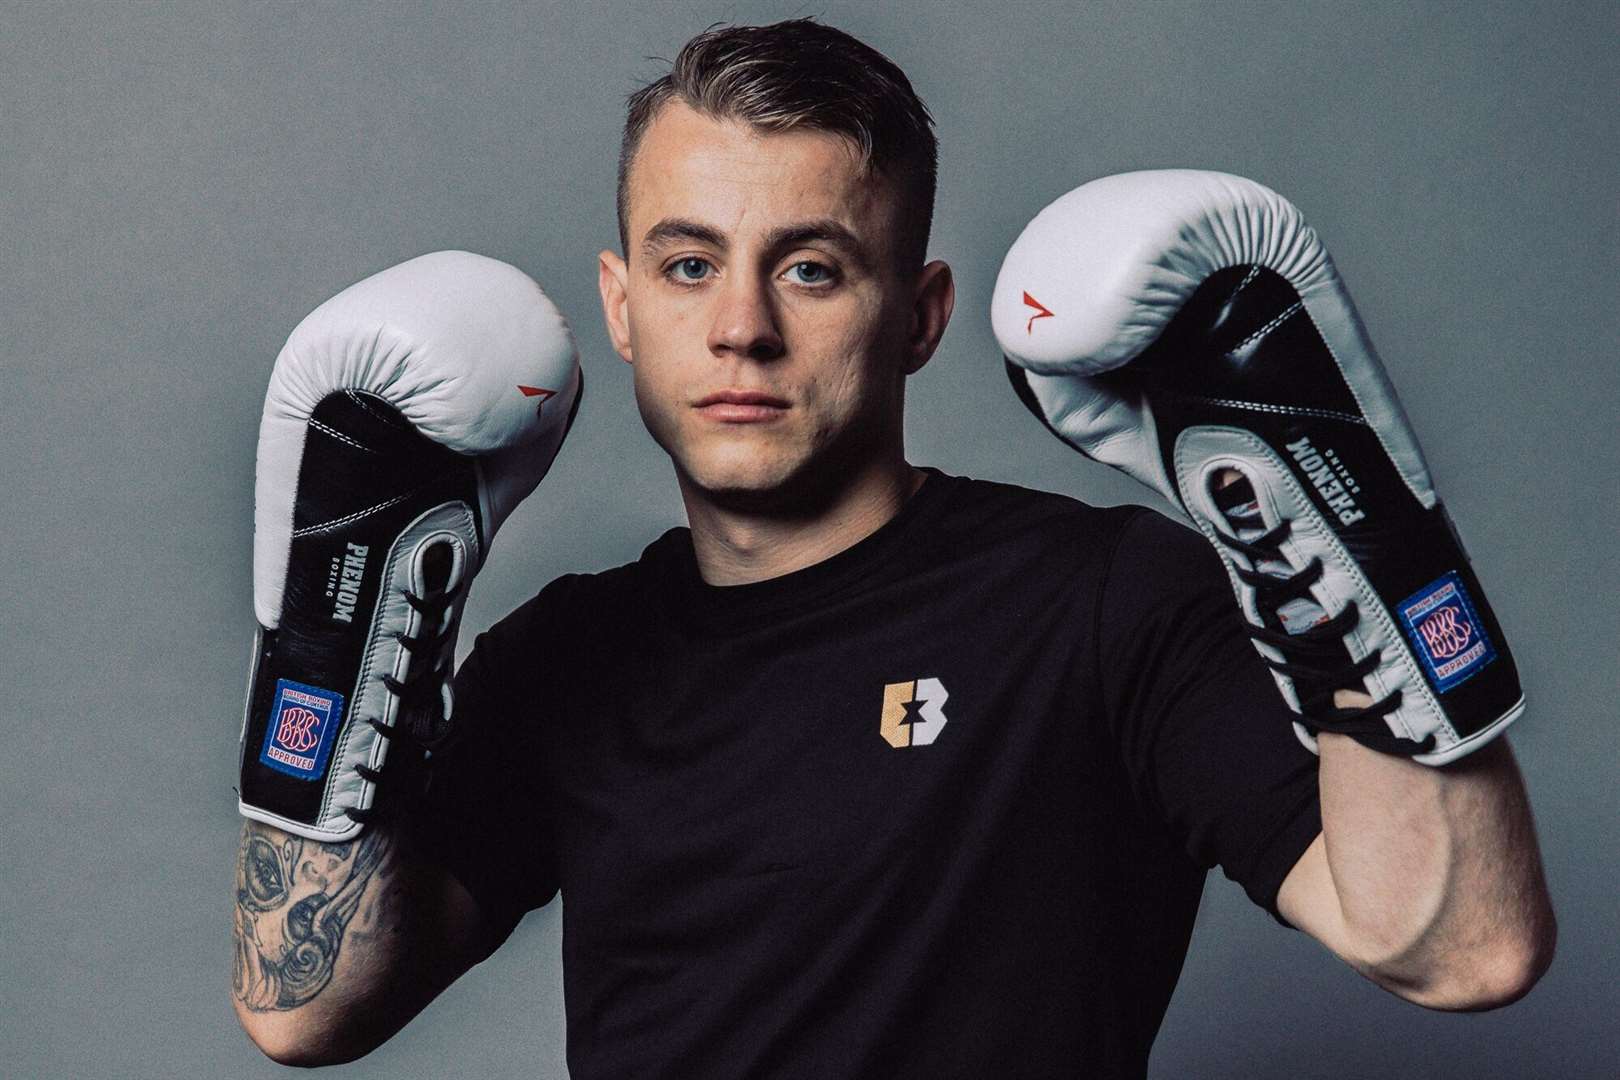 Lenny Fuller is appearing in Ultimate Boxxer 5